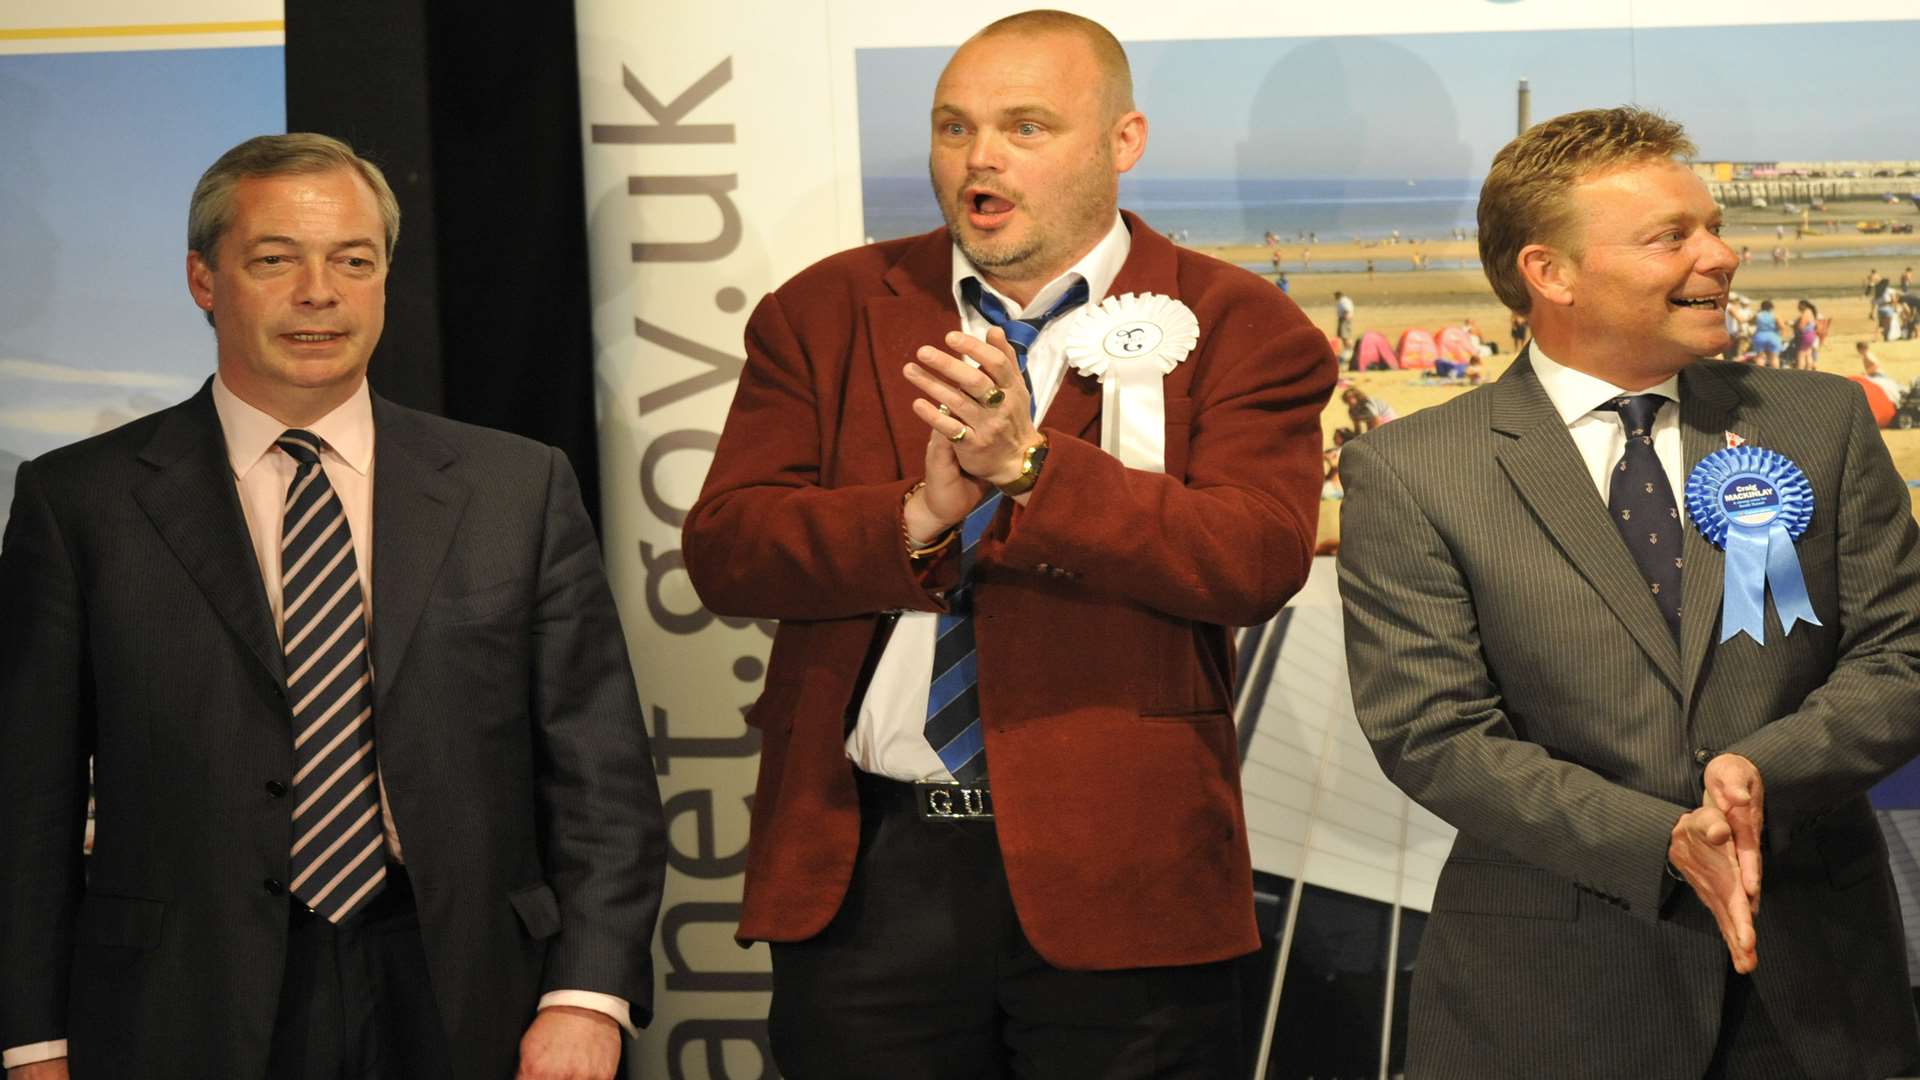 The moment Craig Mackinlay won the South Thanet seat